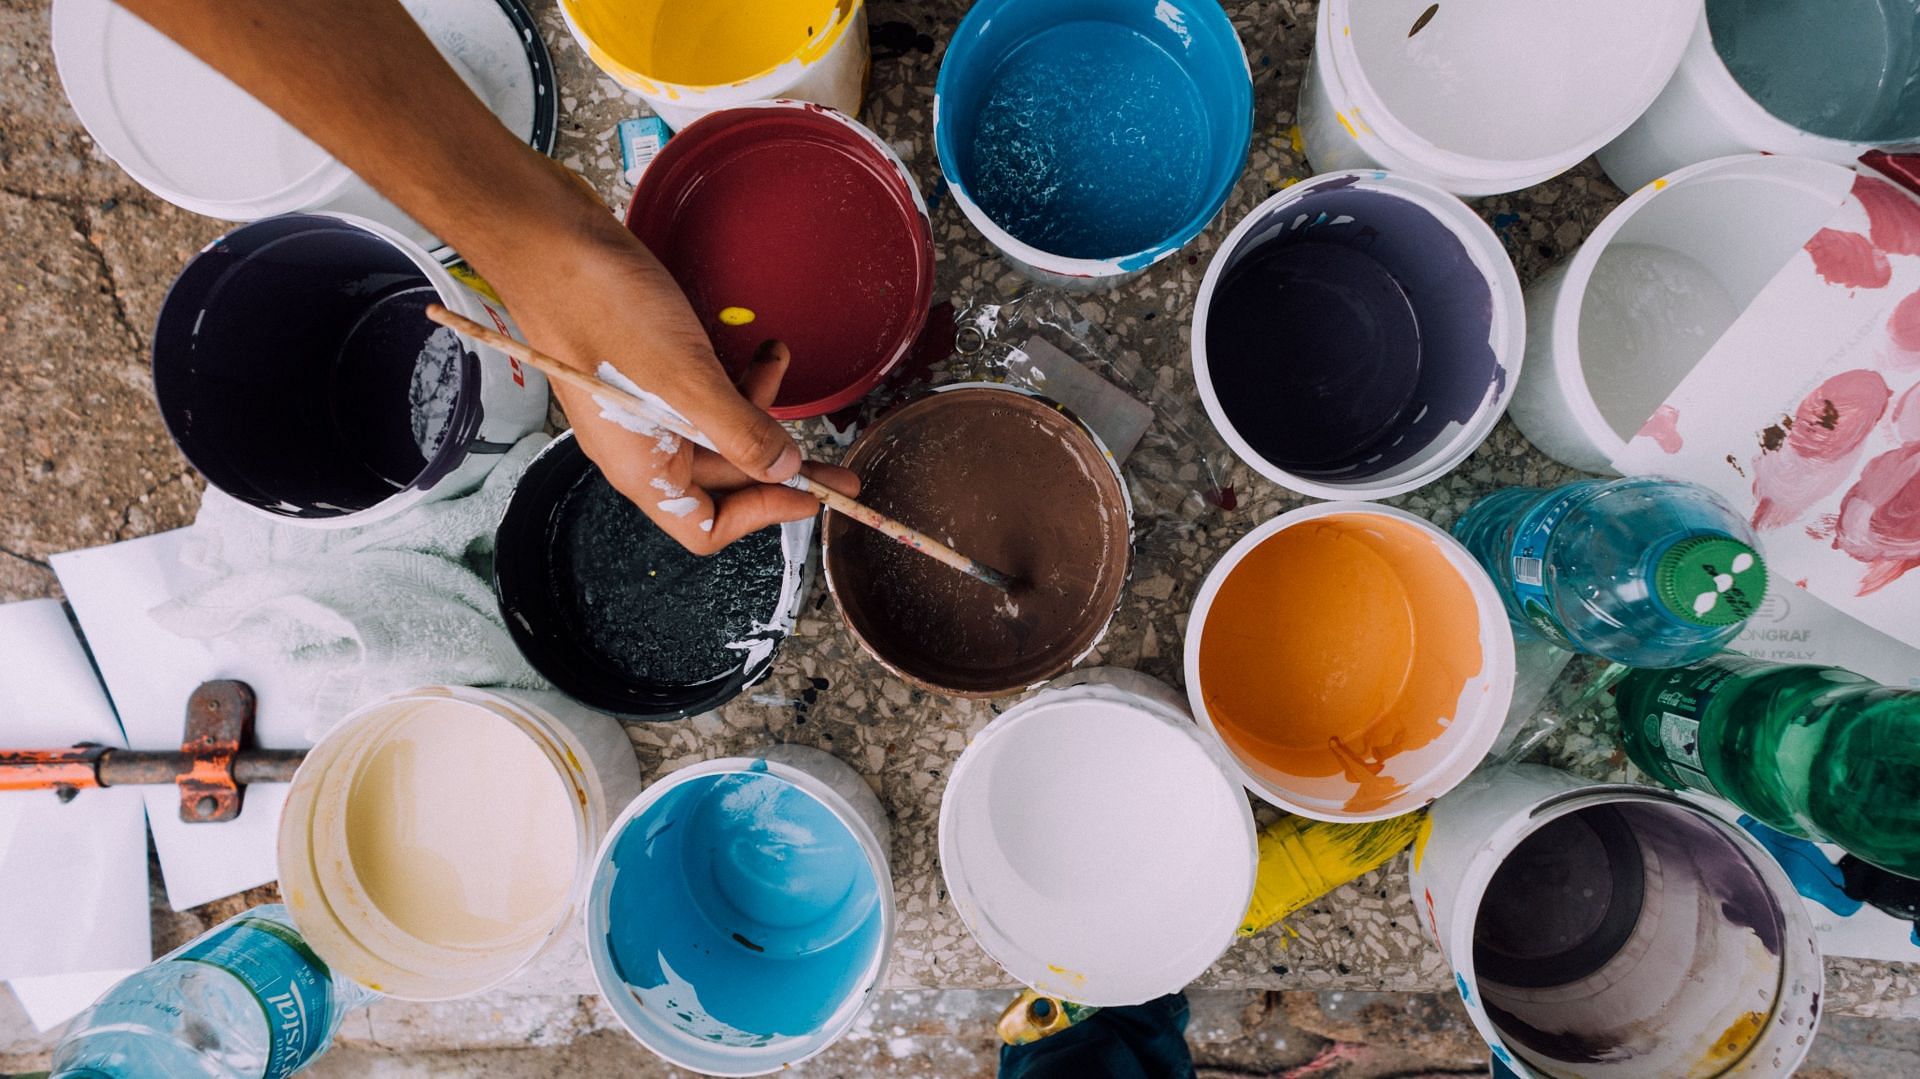 Try painiting or sketching. (Image via Unsplash/Russan Fckr)